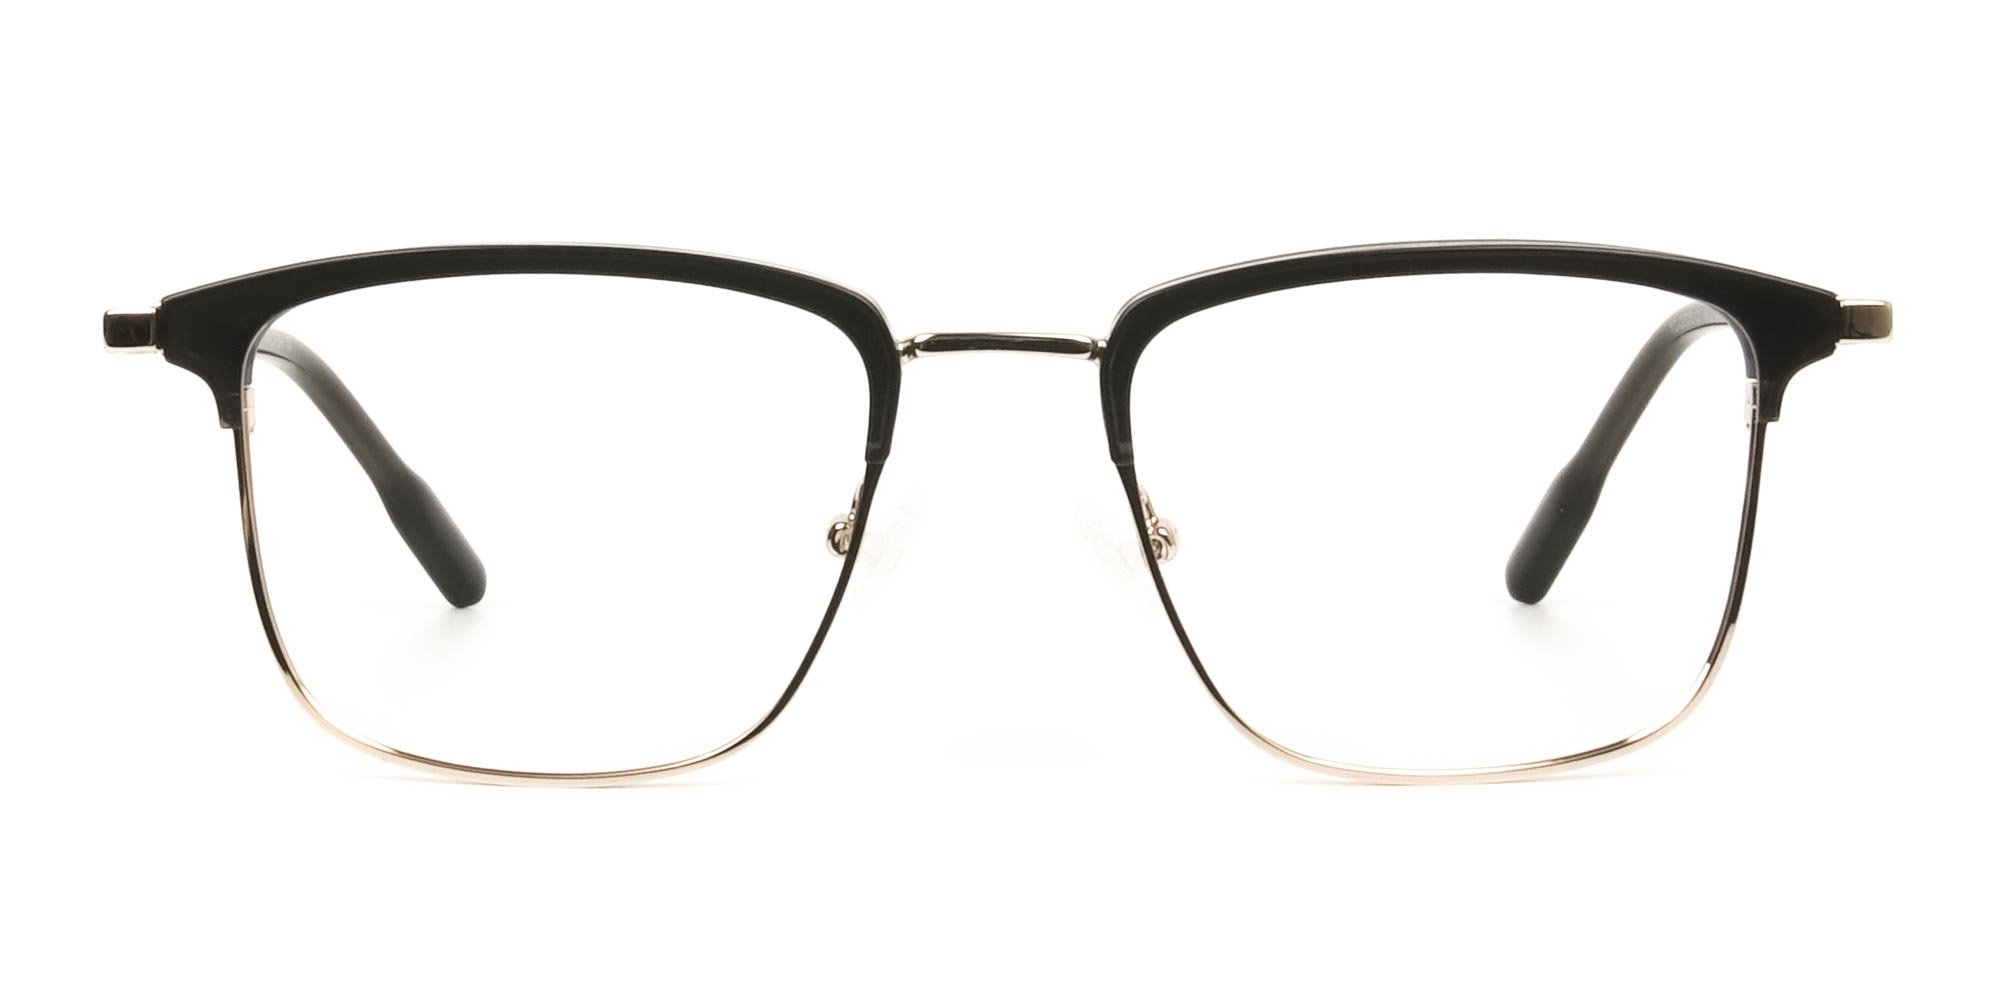 Shining Black and Gold Glasses in Browline Square